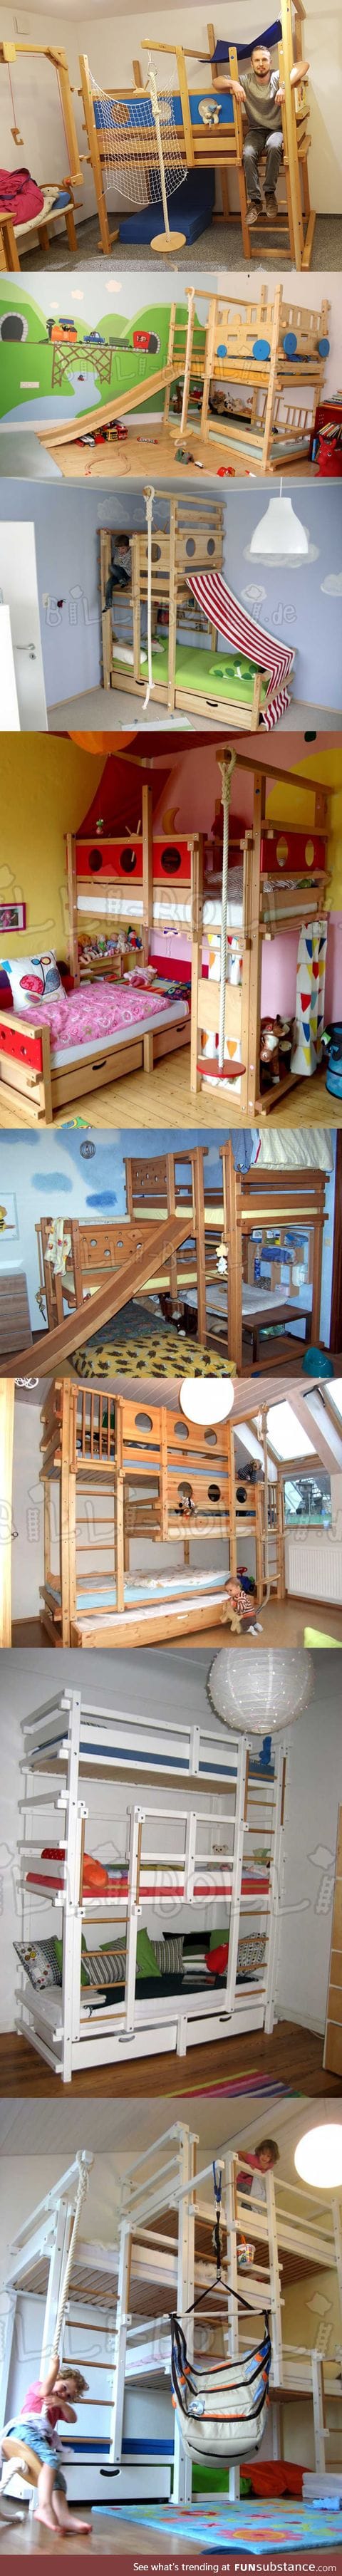 Bunk beds for kids